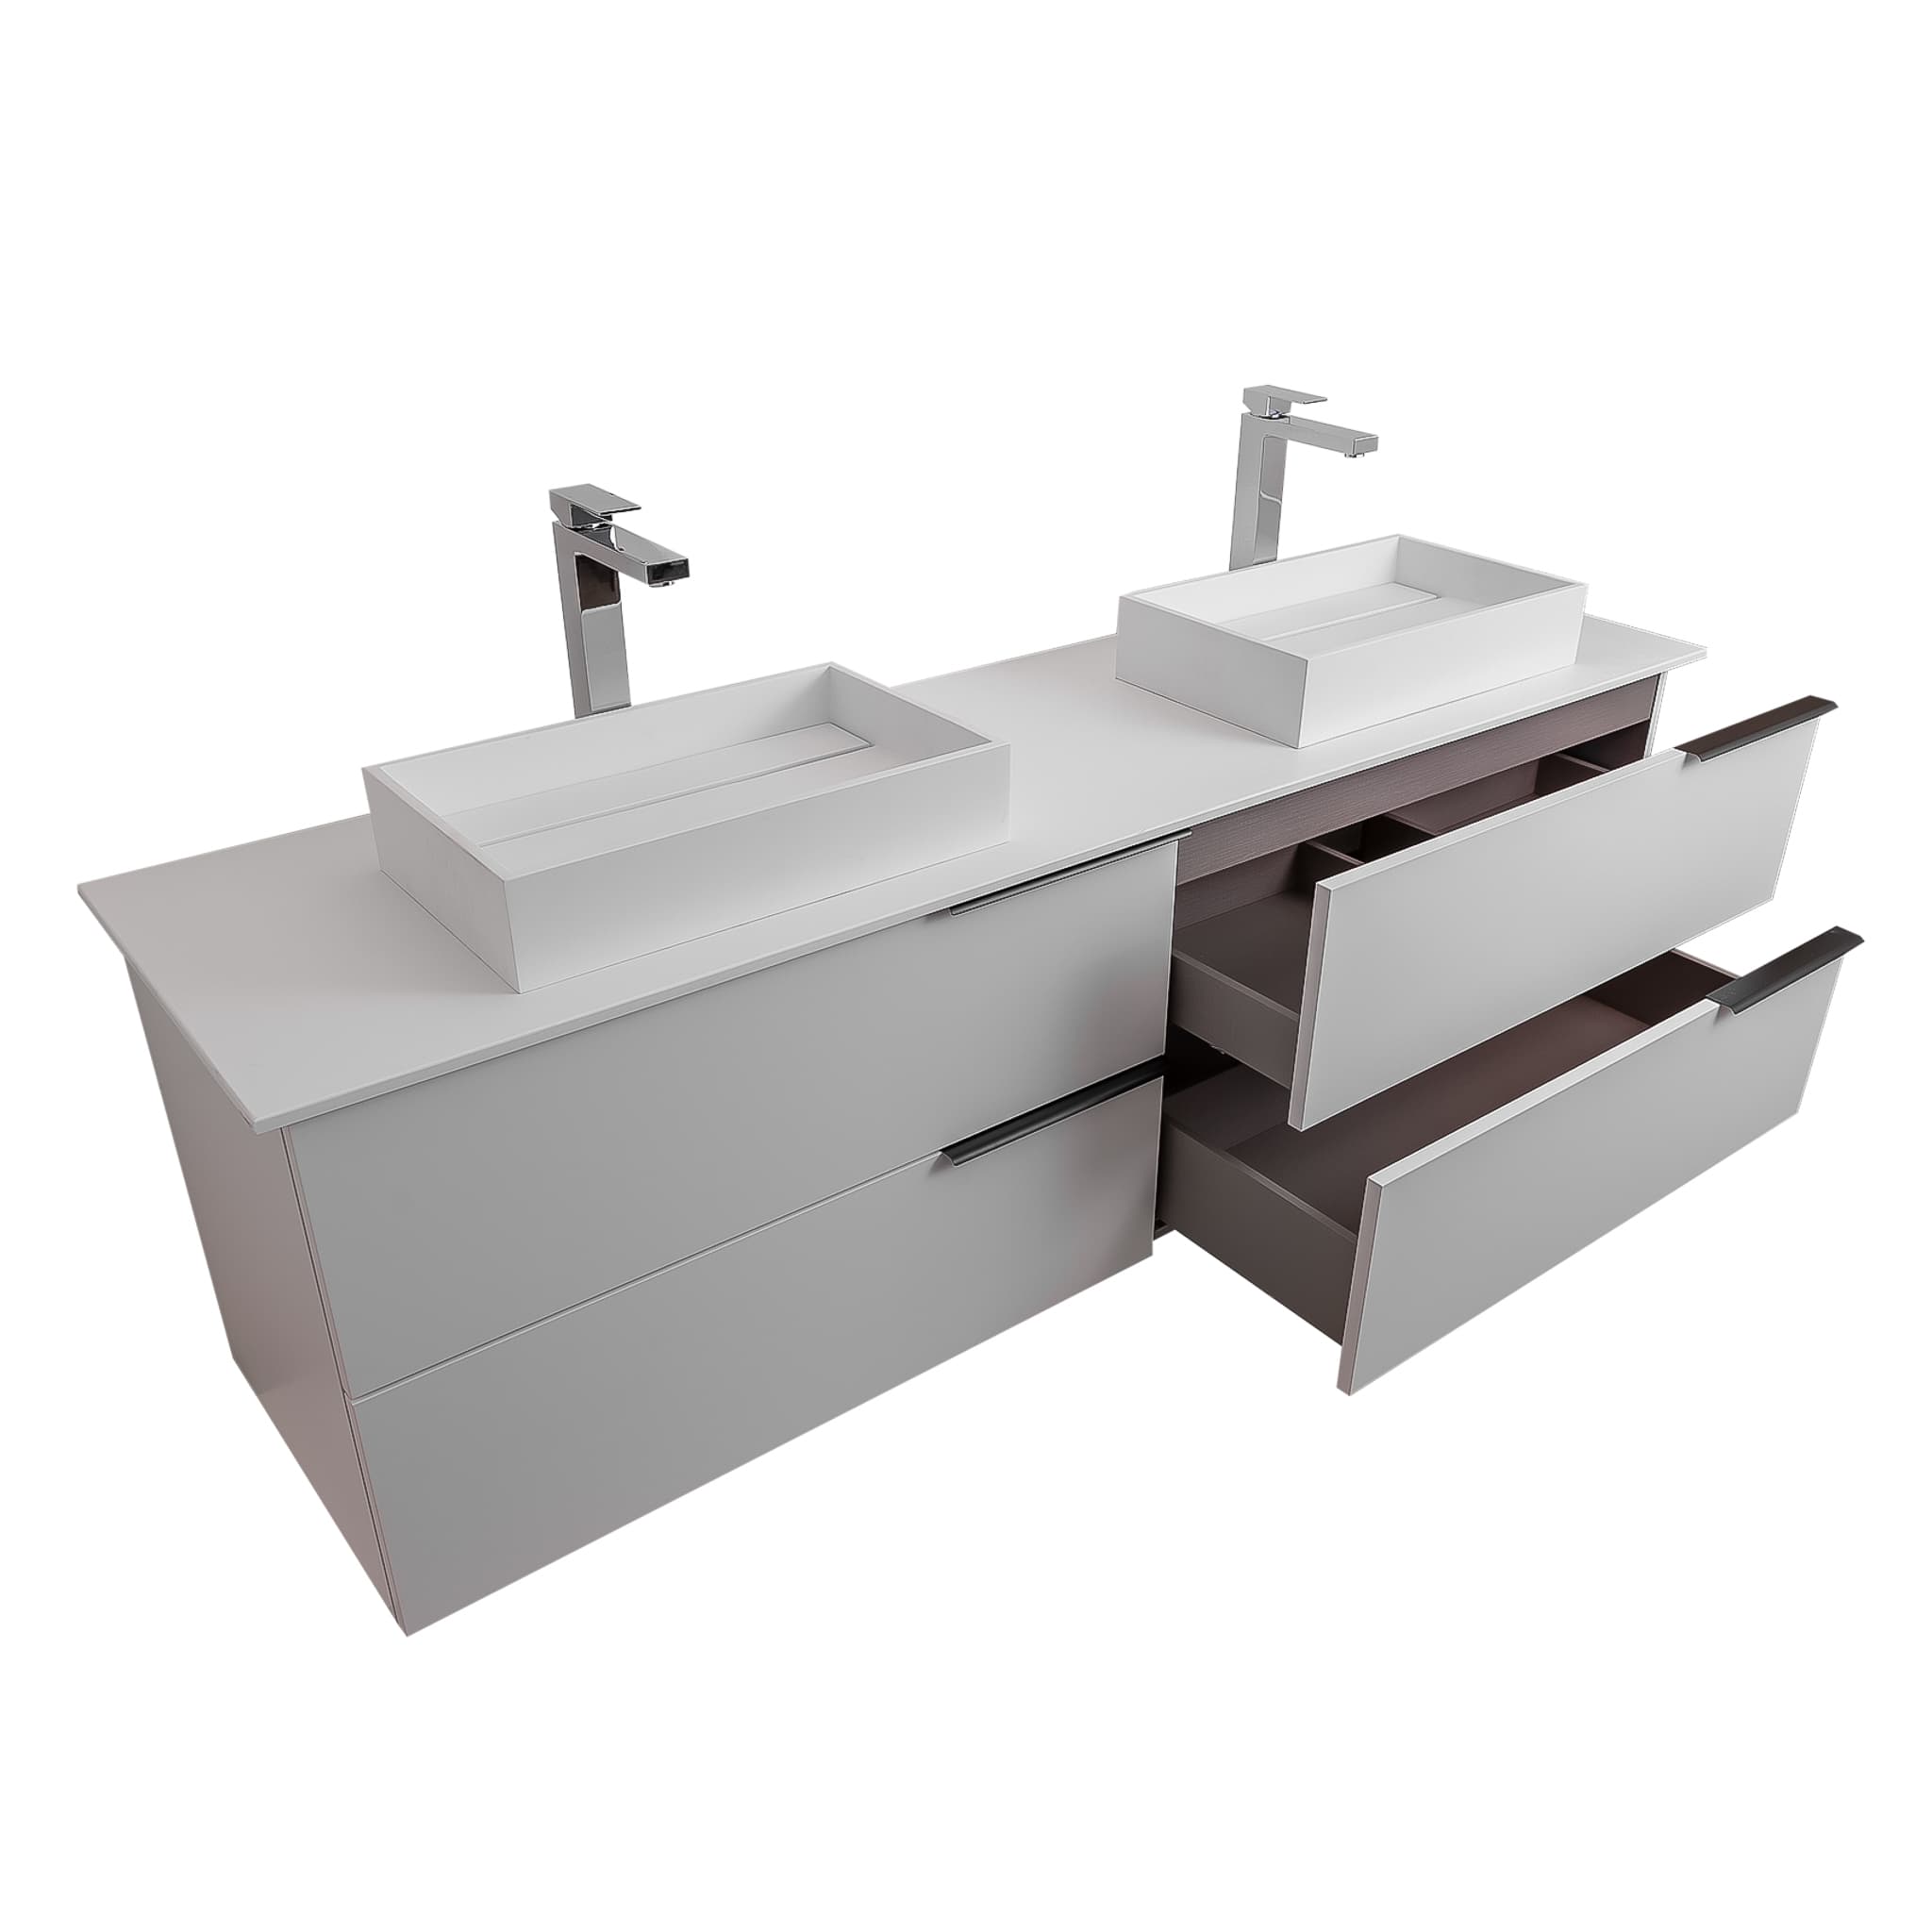 Mallorca 72 Matte White Cabinet, Solid Surface Flat White Counter And Two Infinity Square Solid Surface White Basin 1329, Wall Mounted Modern Vanity Set